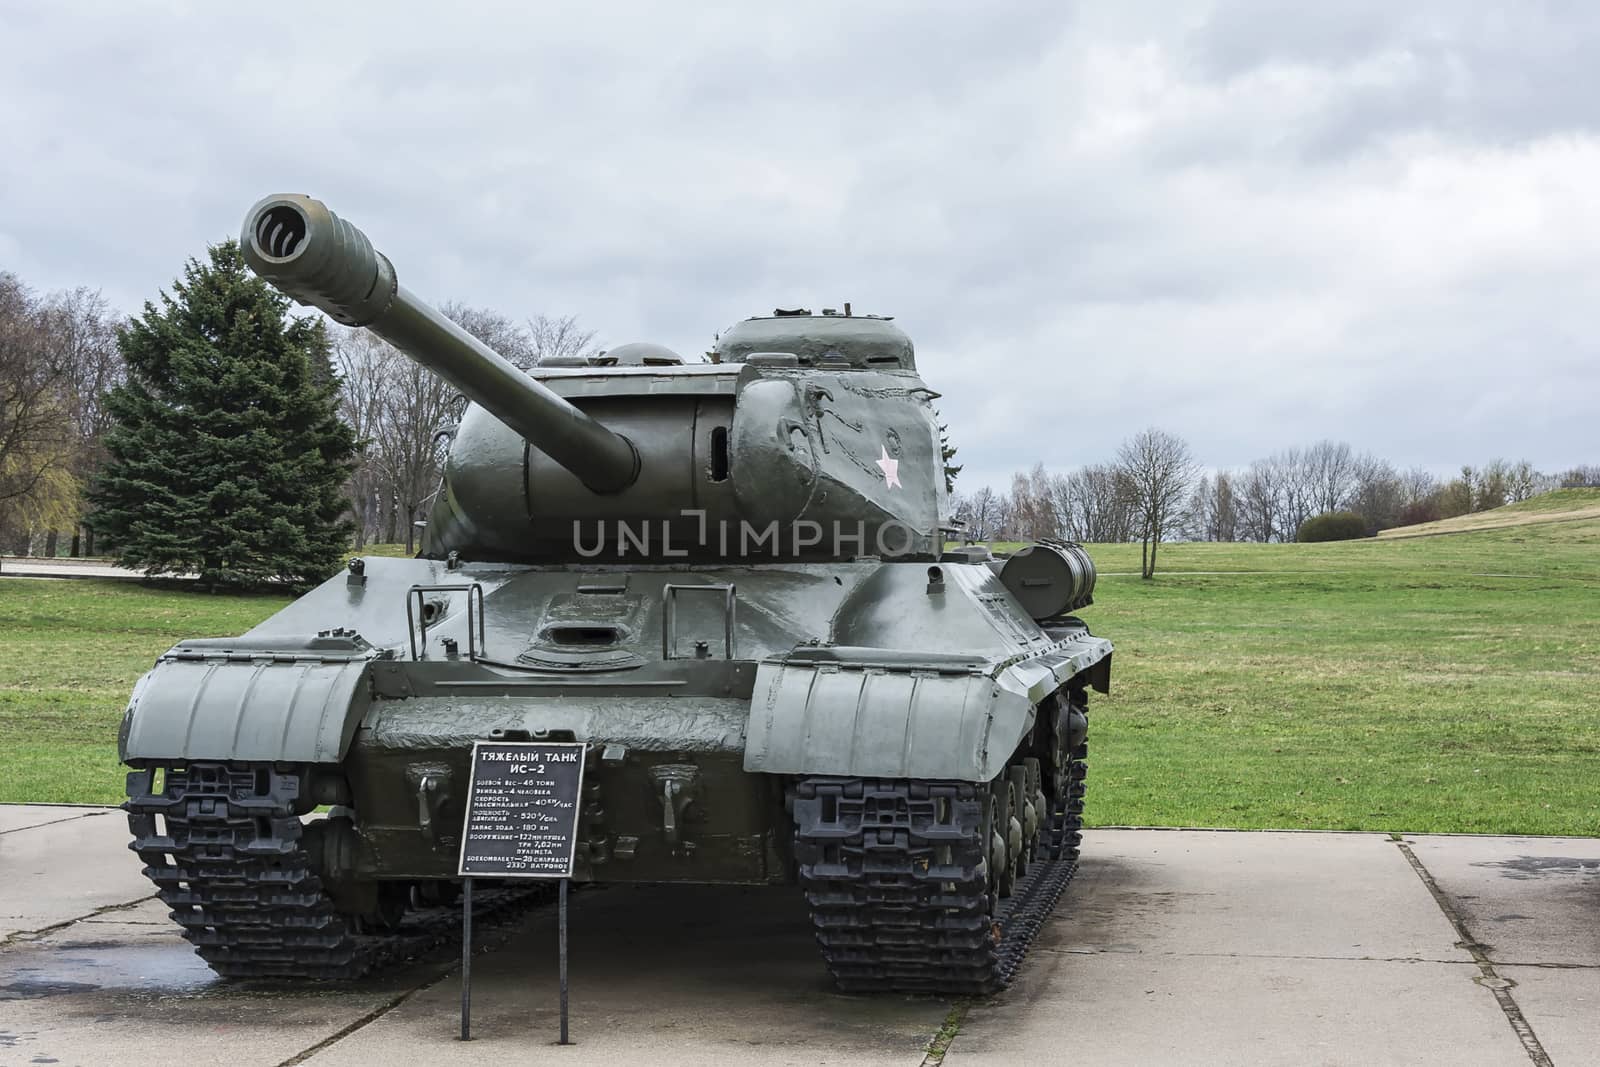 Belarus, Minsk - April 19, 2018: Soviet heavy tank is-2 of the great Patriotic war, an exhibit of the memorial complex mound of glory.